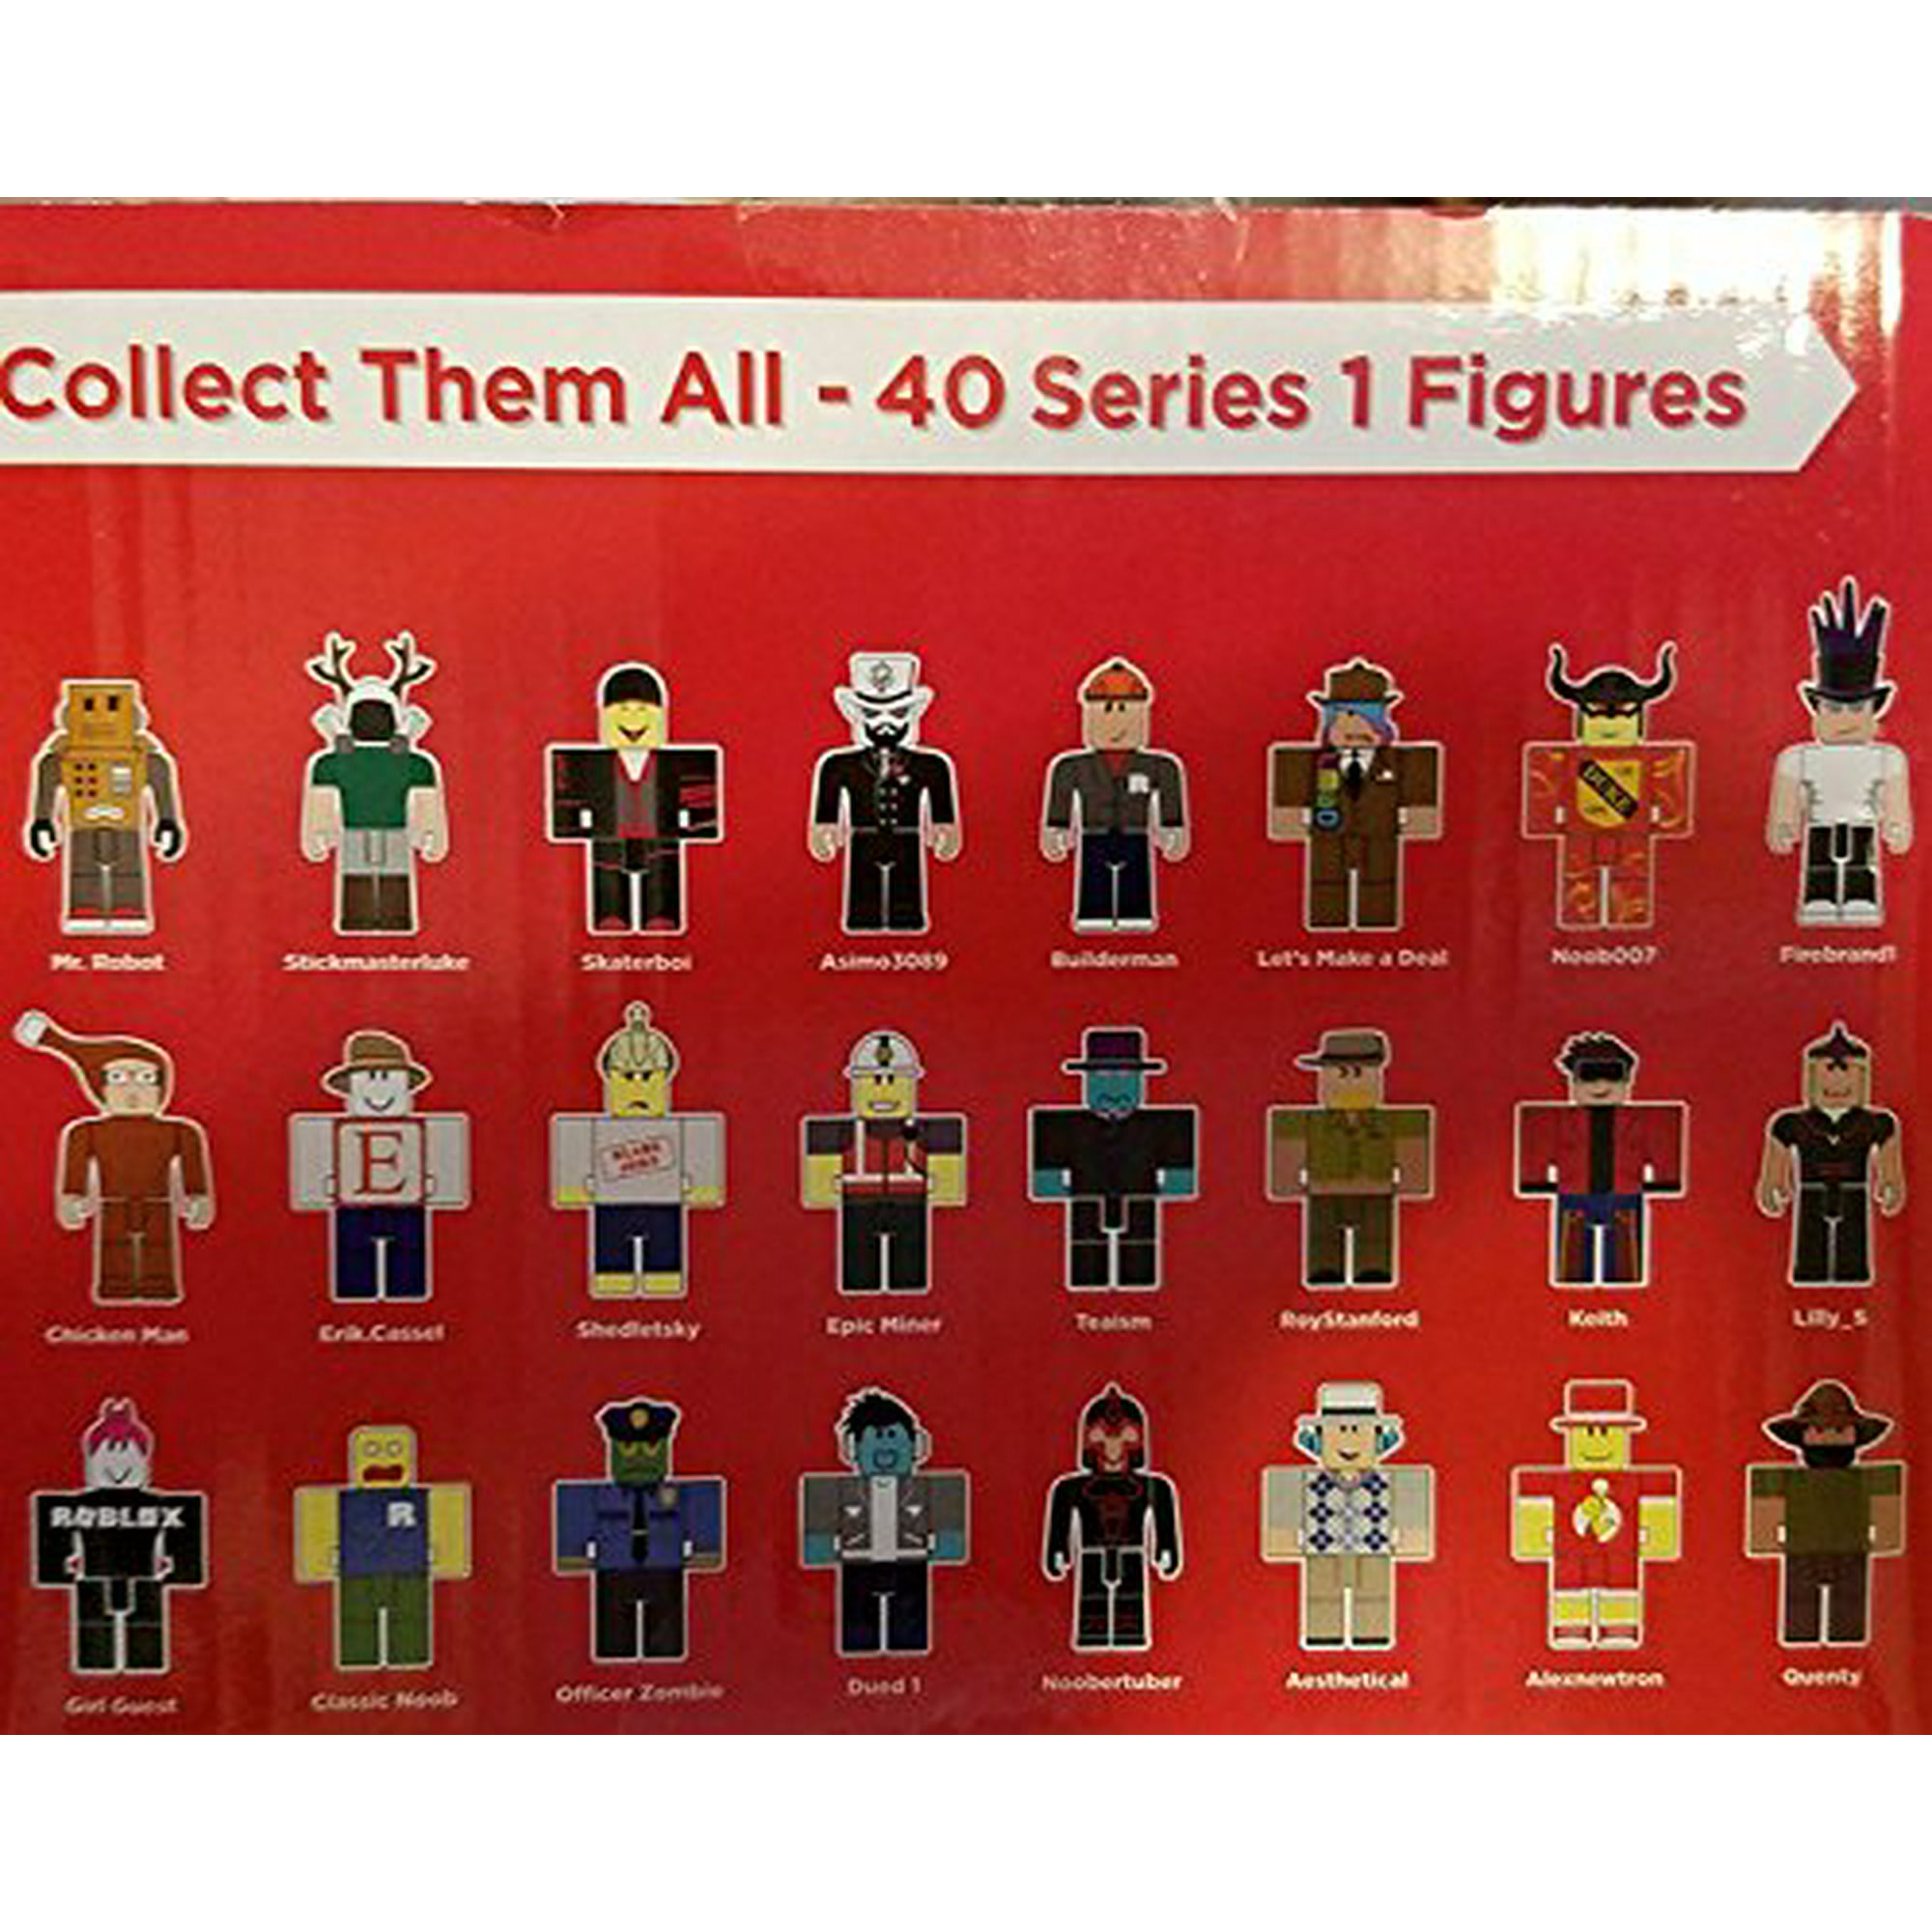 Roblox Series 1 Lilly S Action Figure Mystery Box Virtual Item Code 2 5 Walmart Canada - roblox series 4 figurine with virtual item code toys games toys on carousell